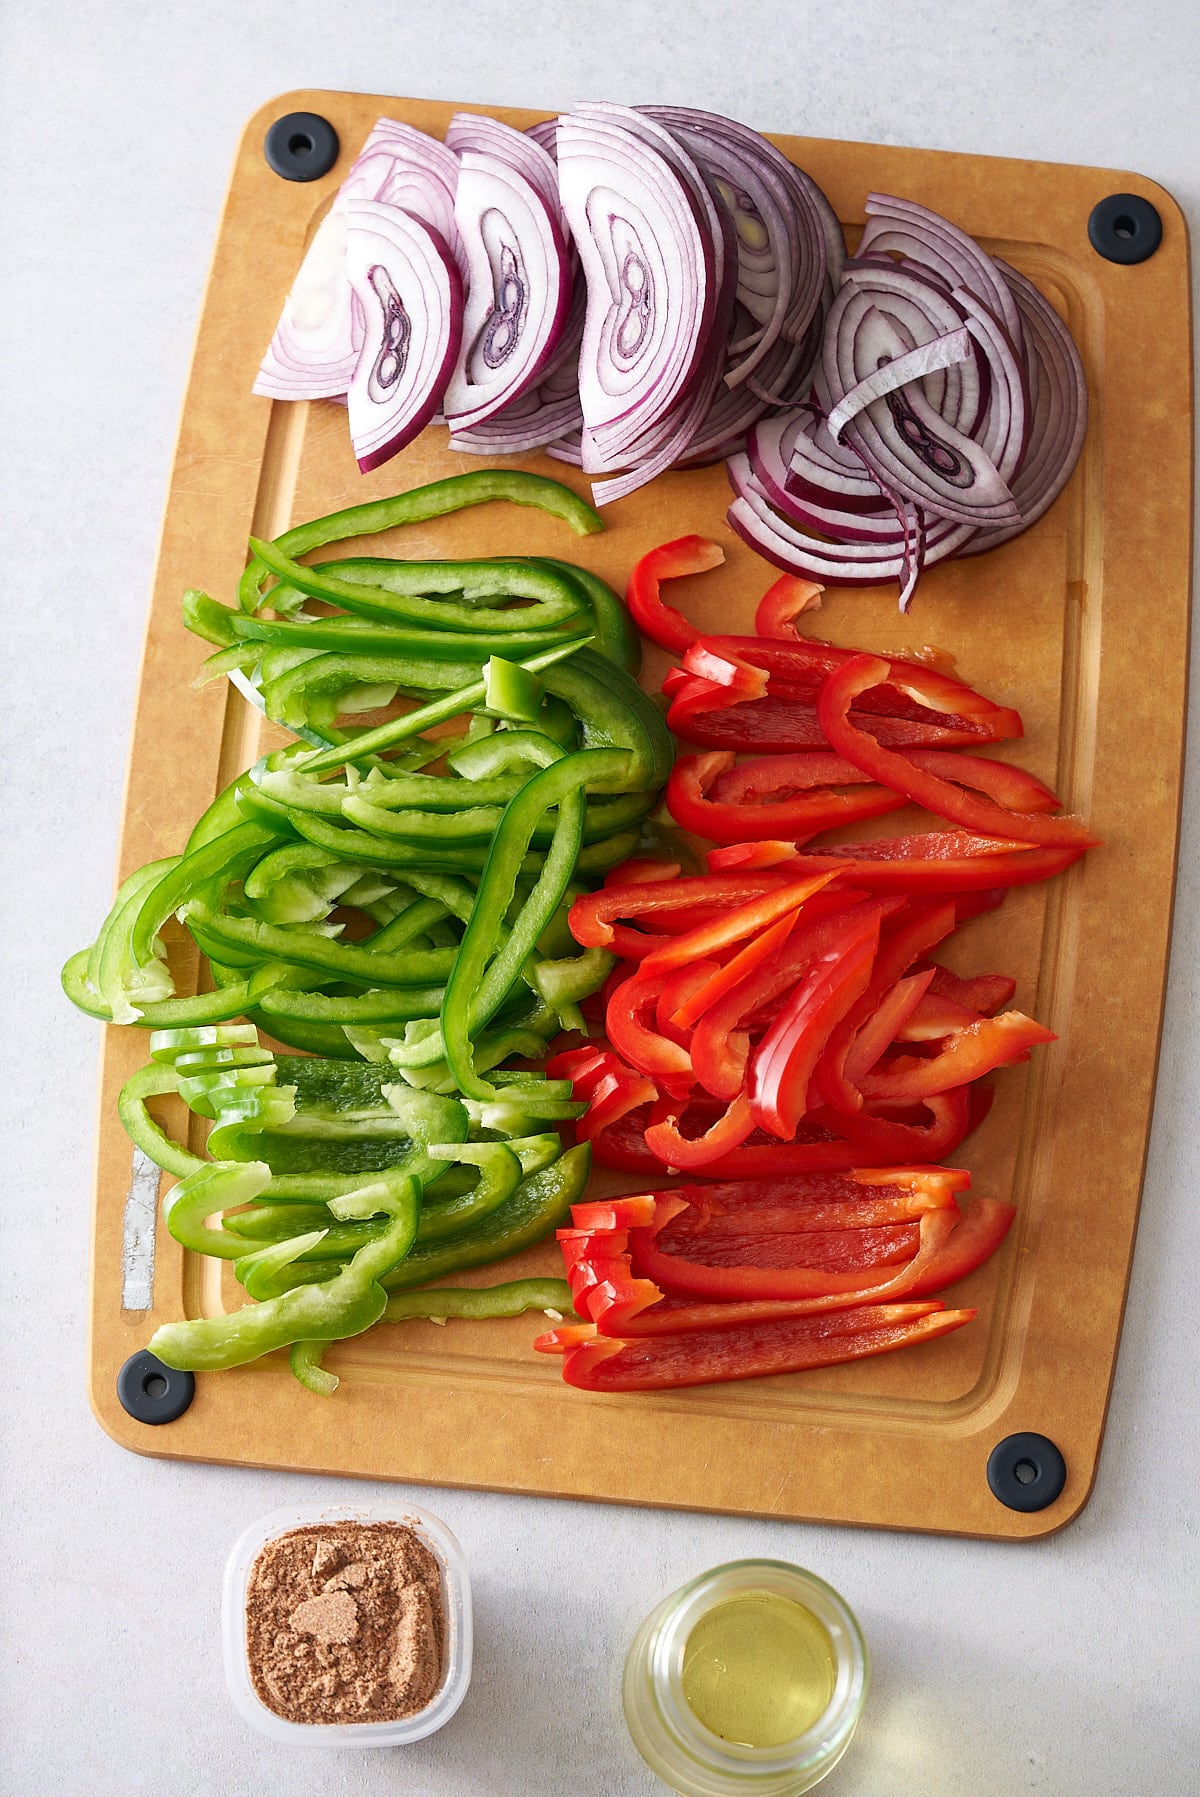 Sliced red onion and red and green bell peppers on a wooden chopping board, with pots of fajita seasoning and olive oil set alongside.